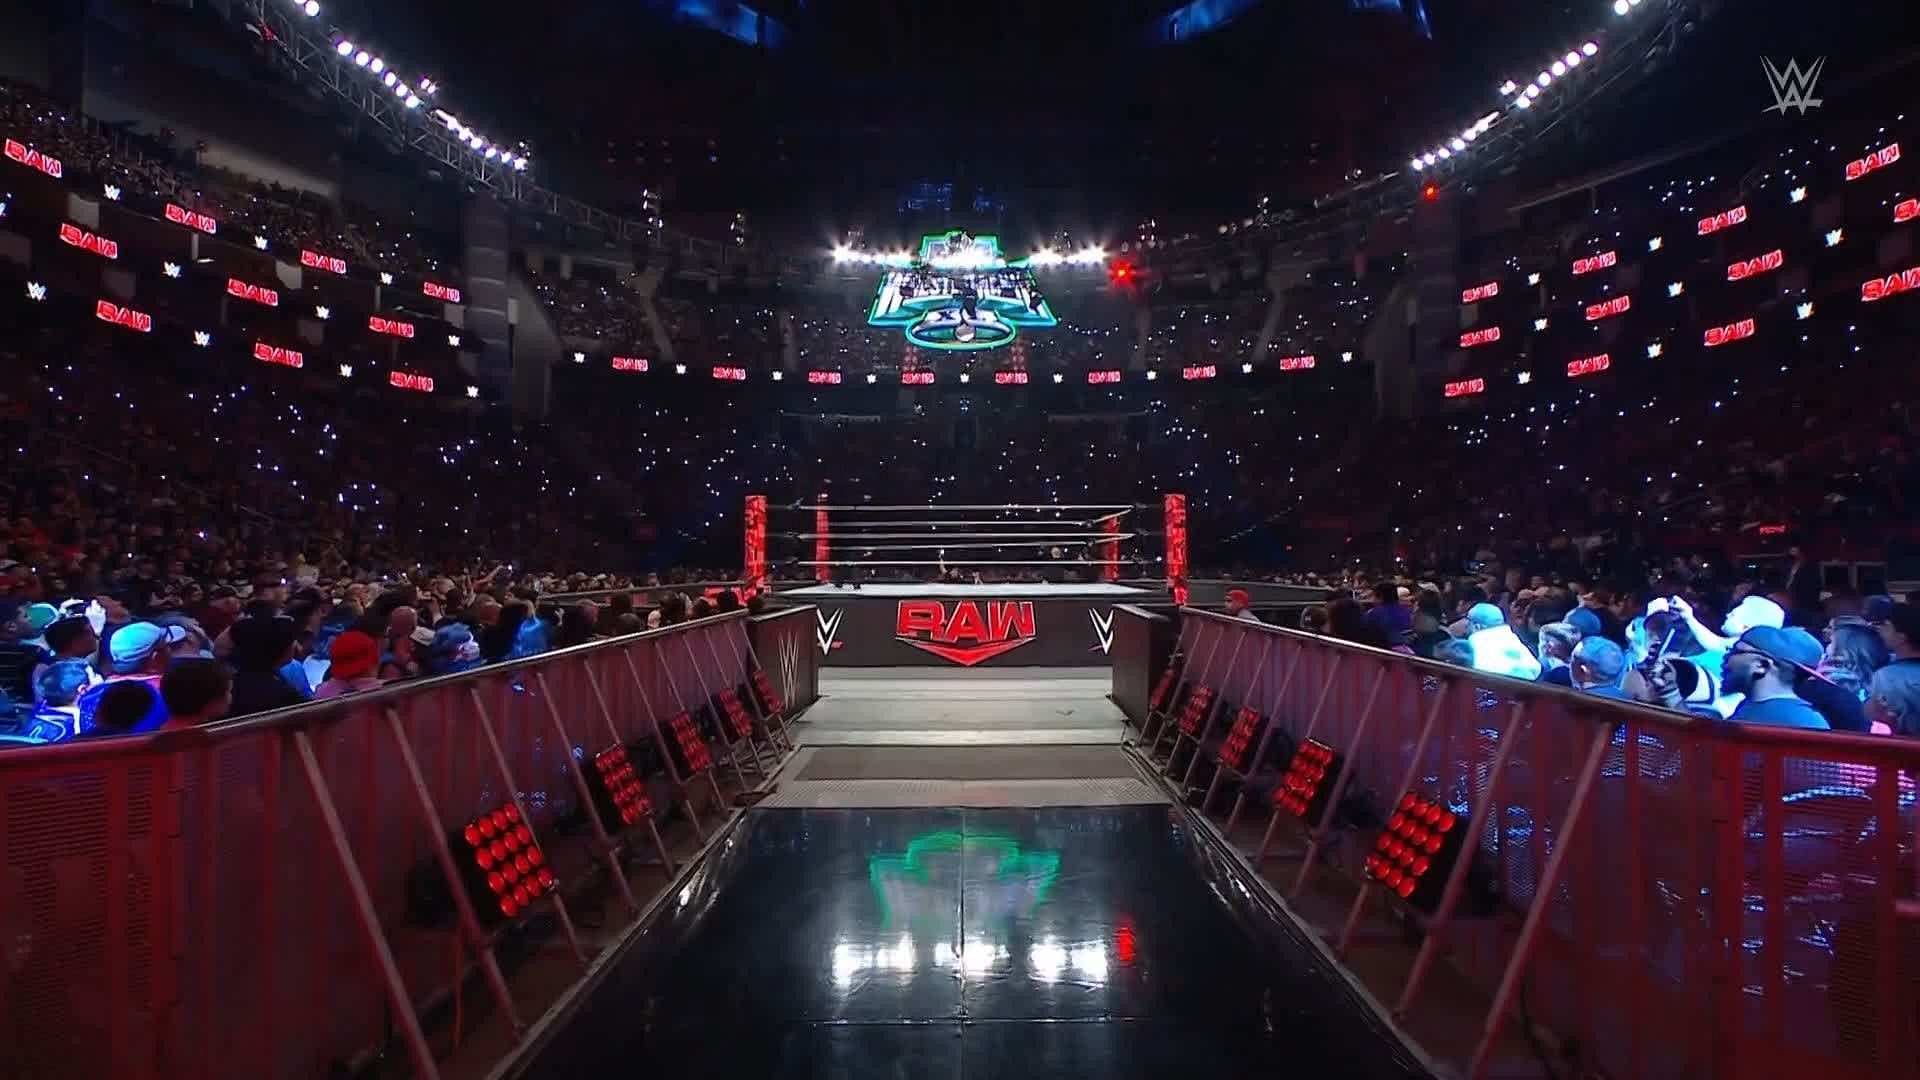 The WrestleMania 40 logo hanging above the WWE RAW ring